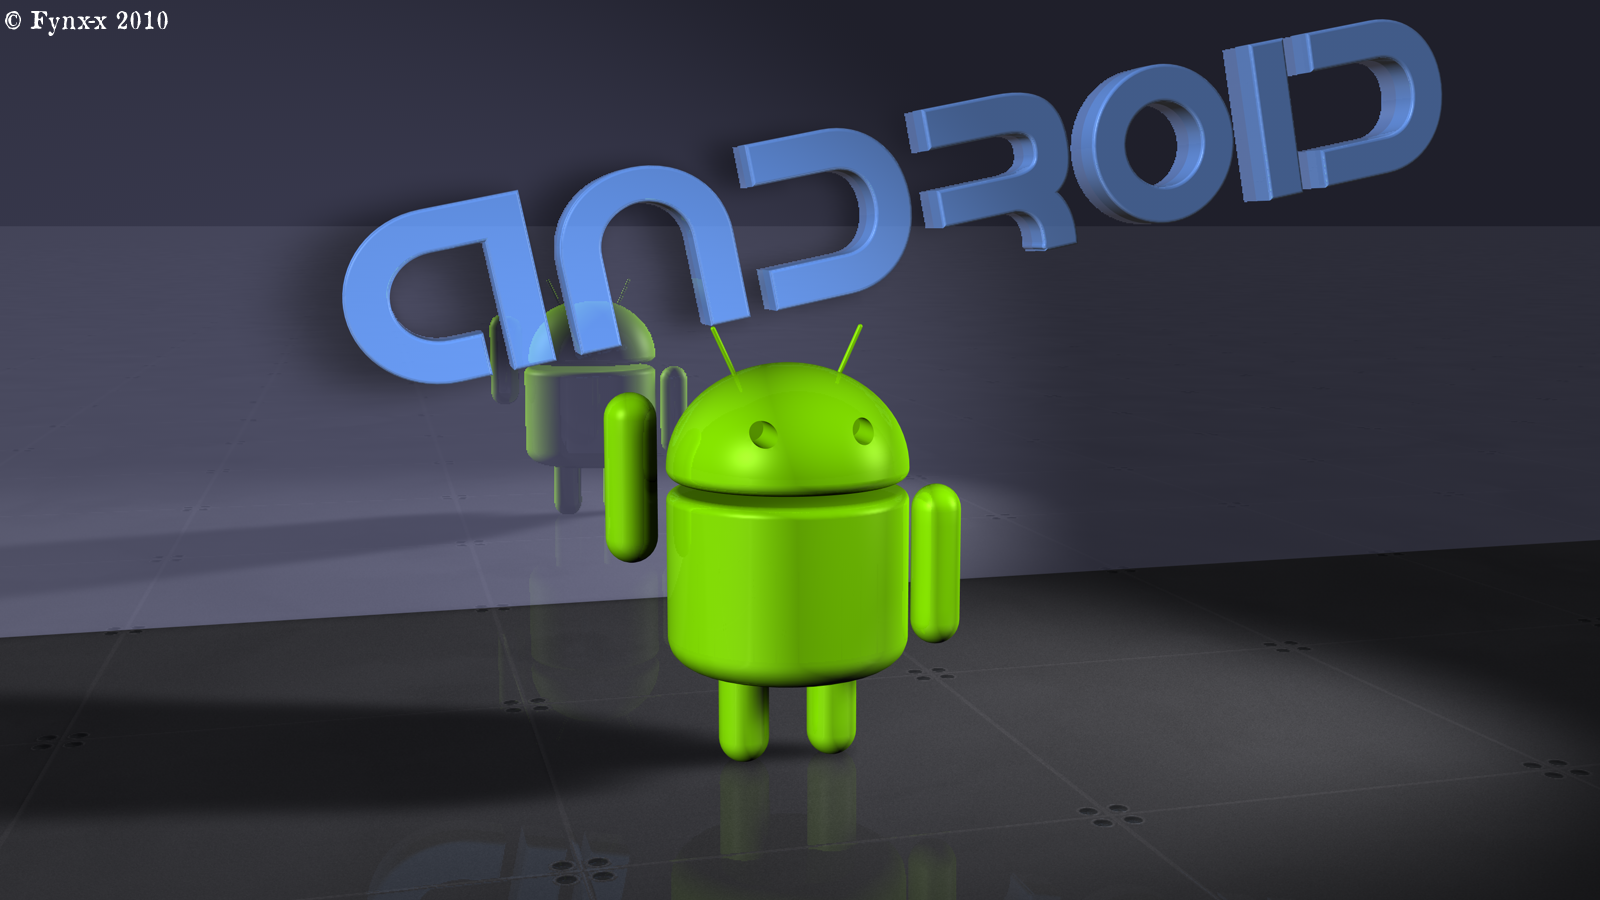 Android Wallpaper New Best Indexwallpaper